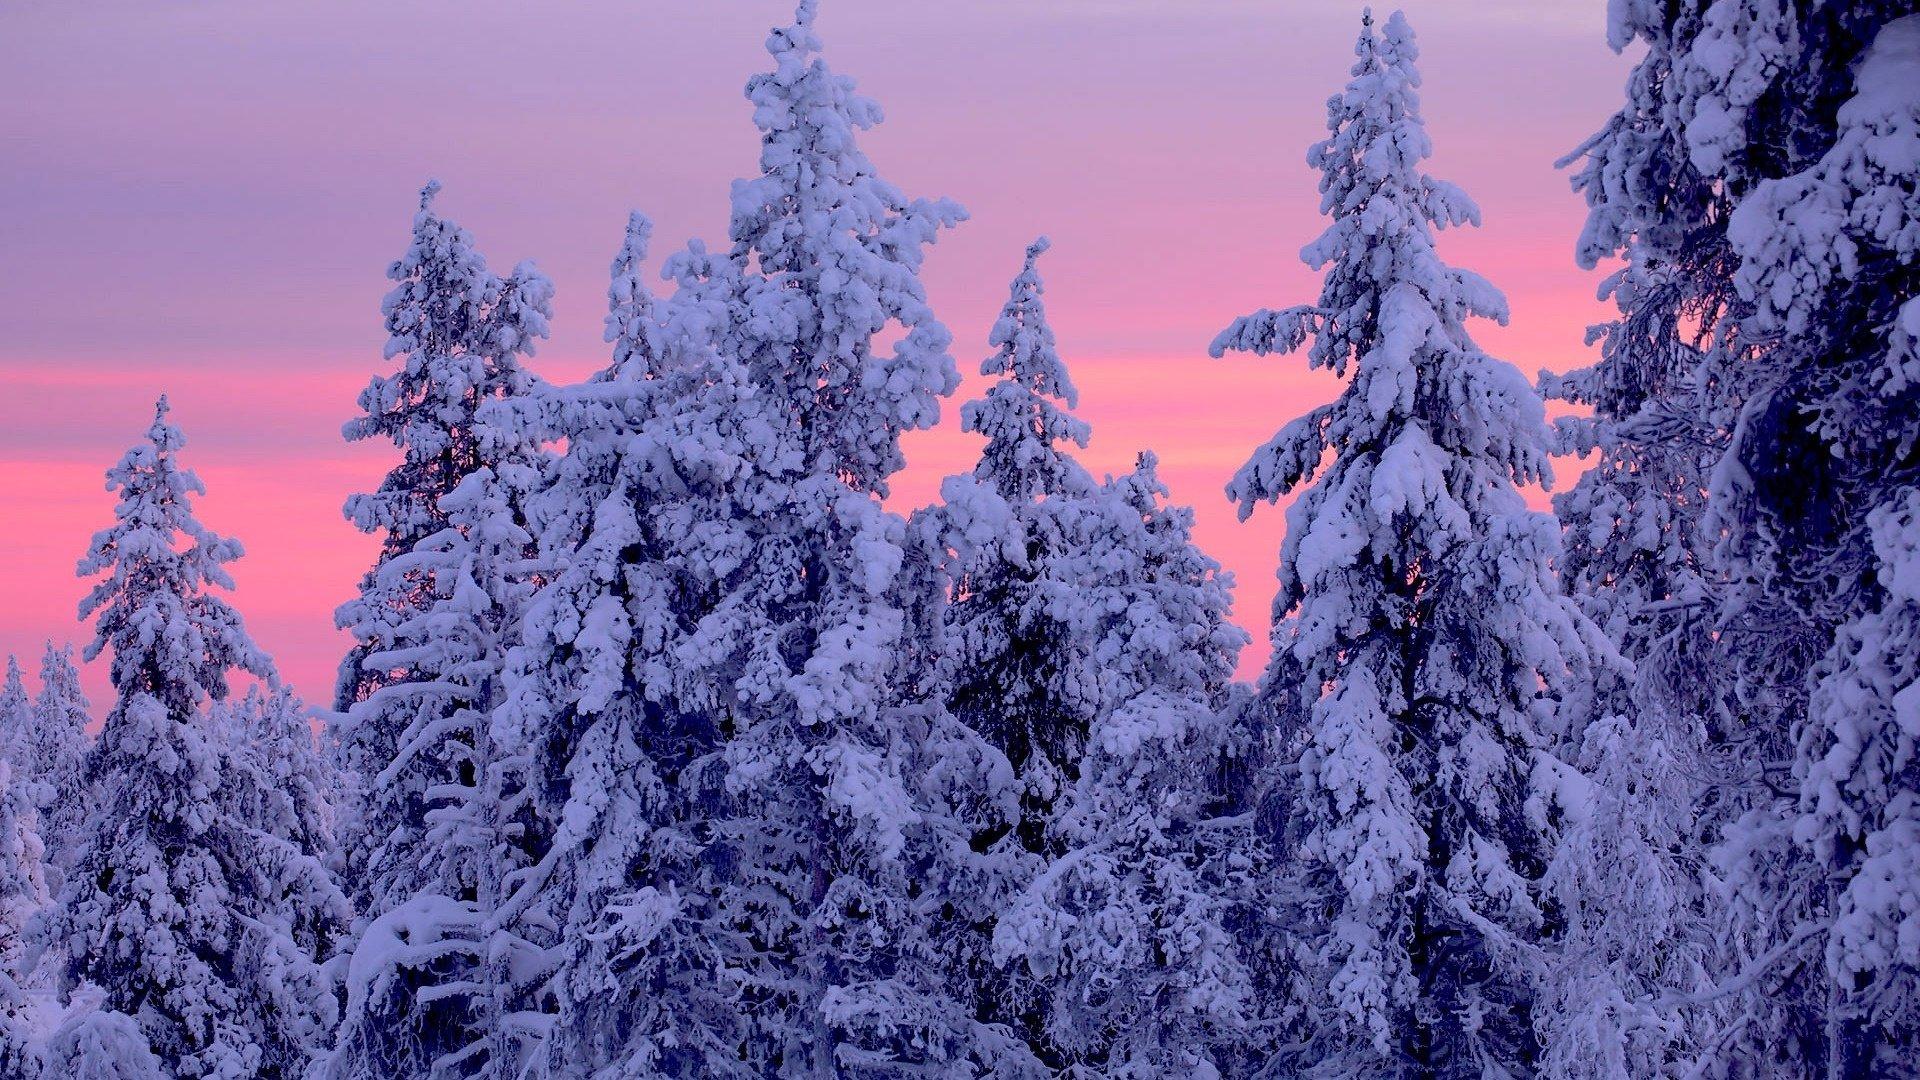 Pink Sunset over Snowy Winter Forest HD Wallpaper